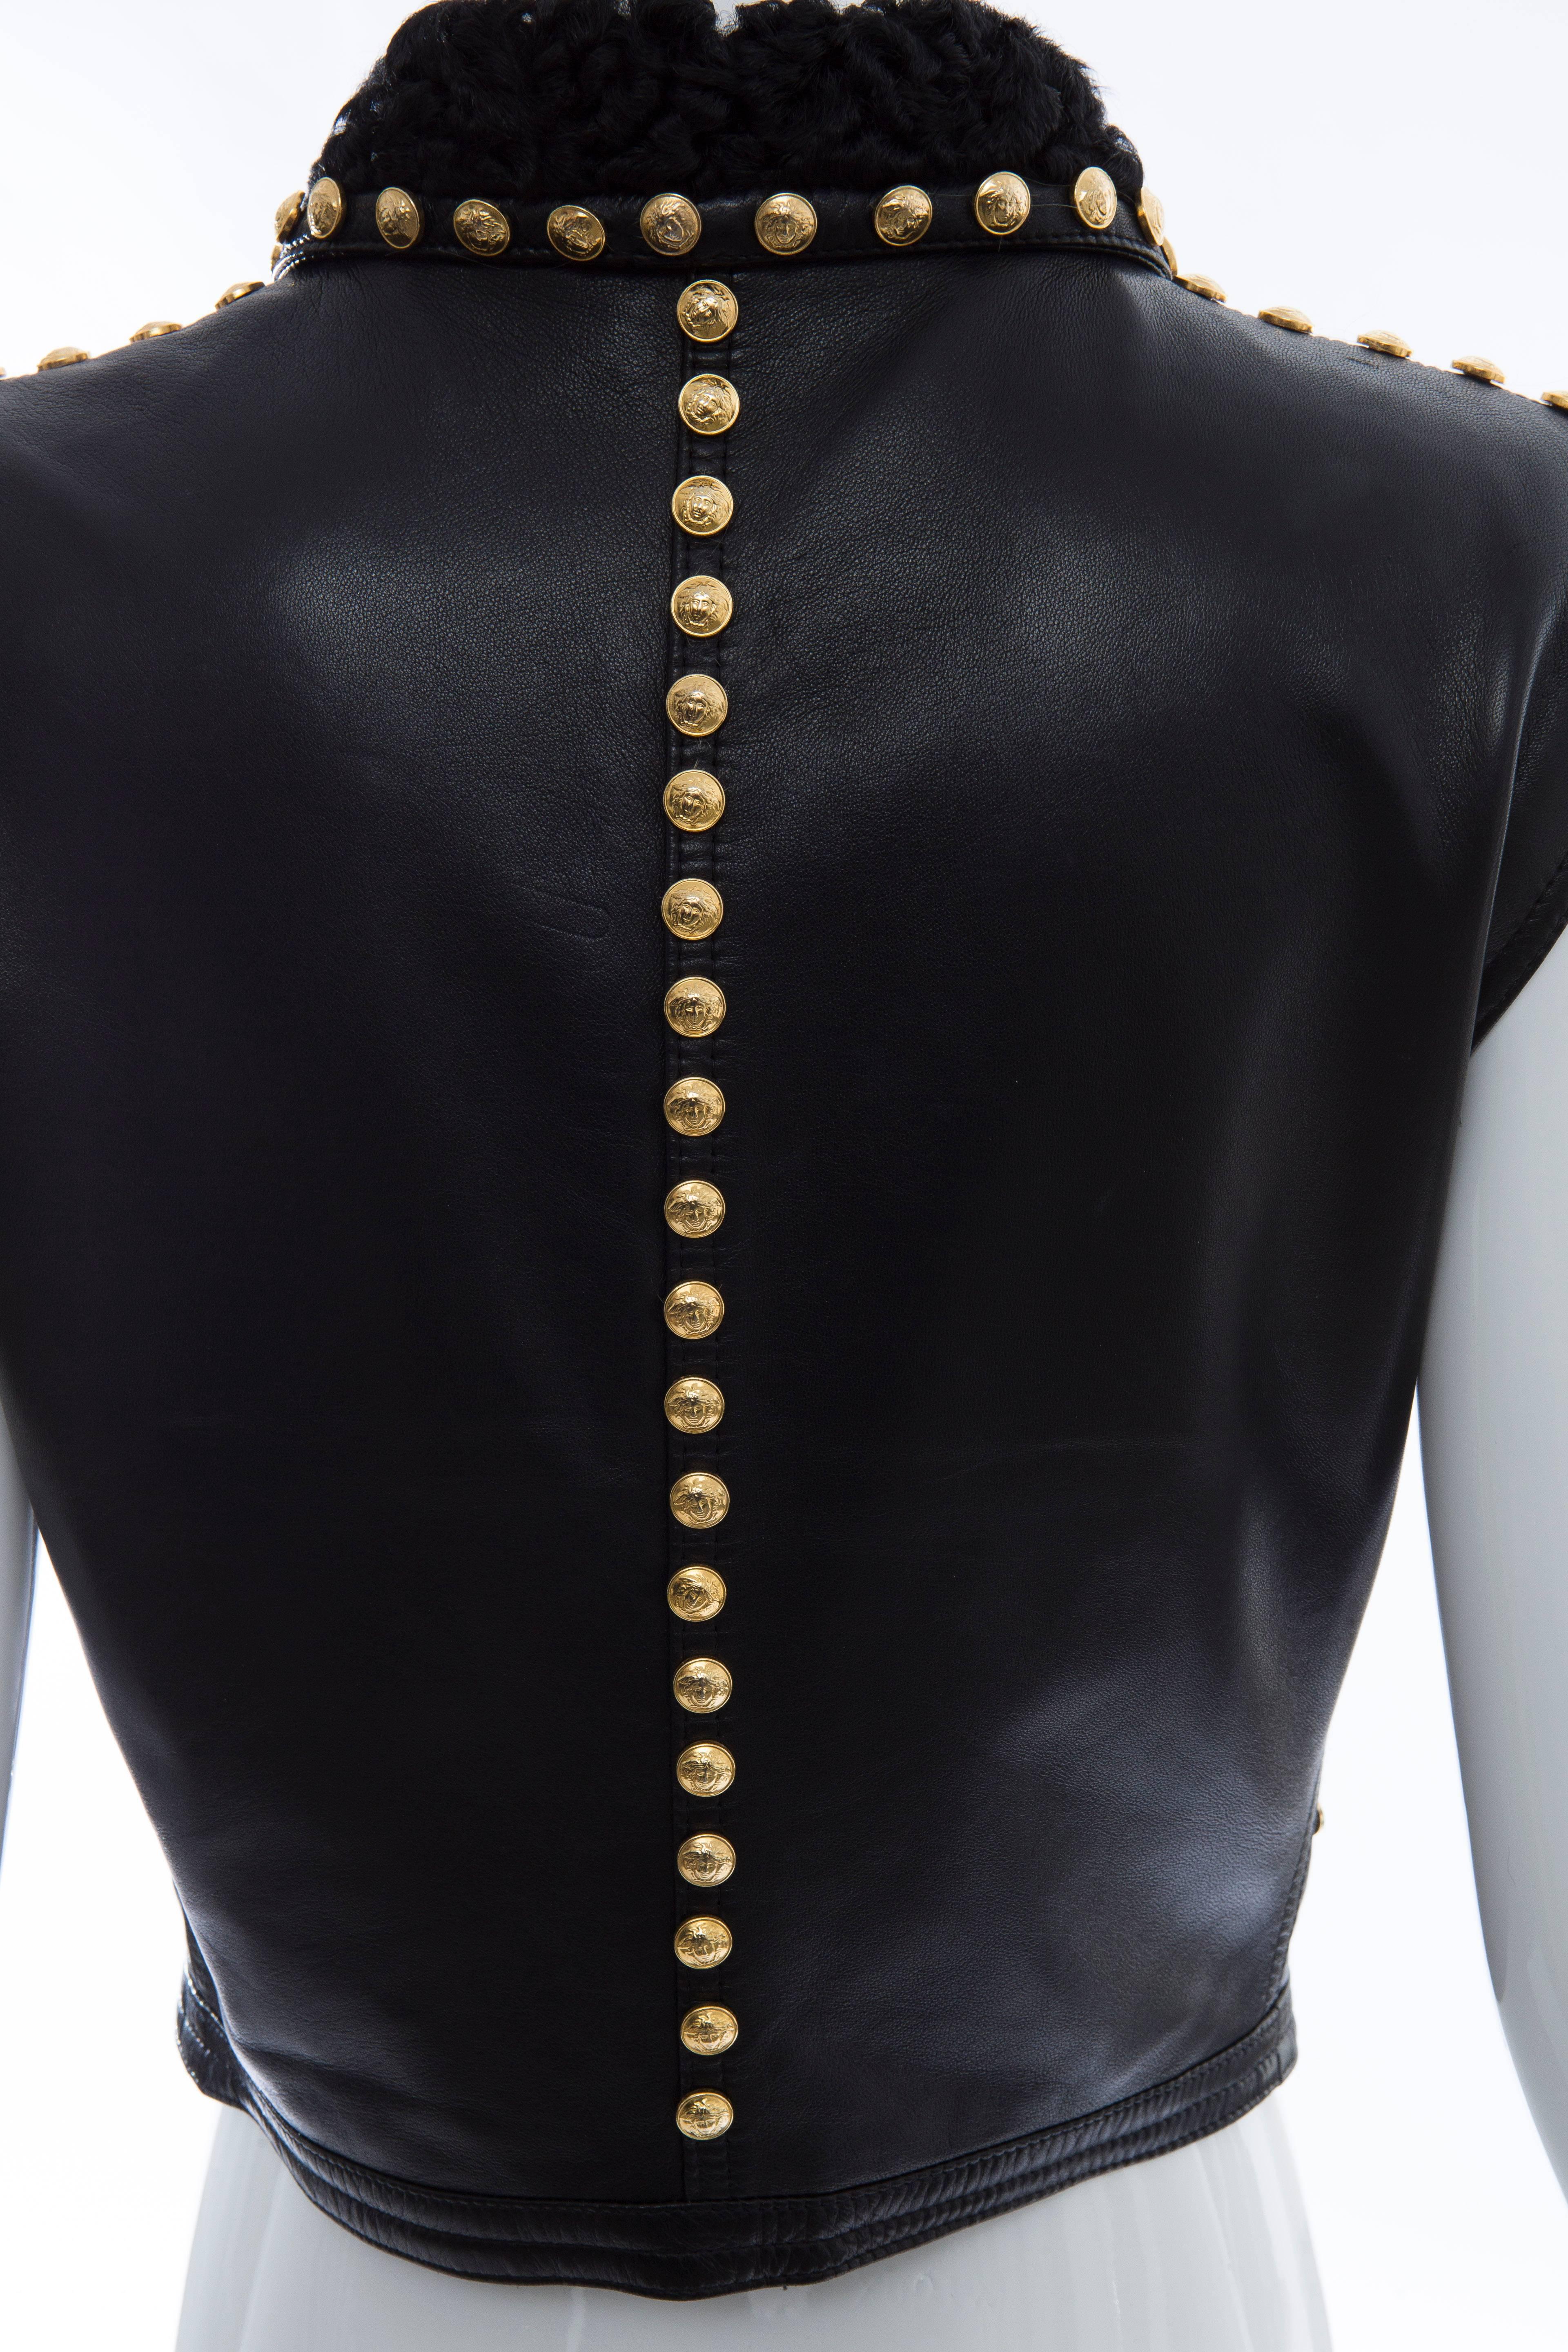 Gianni Versace Black Studded Leather Vest With Persian Lamb Collar, Circa 1990's 4